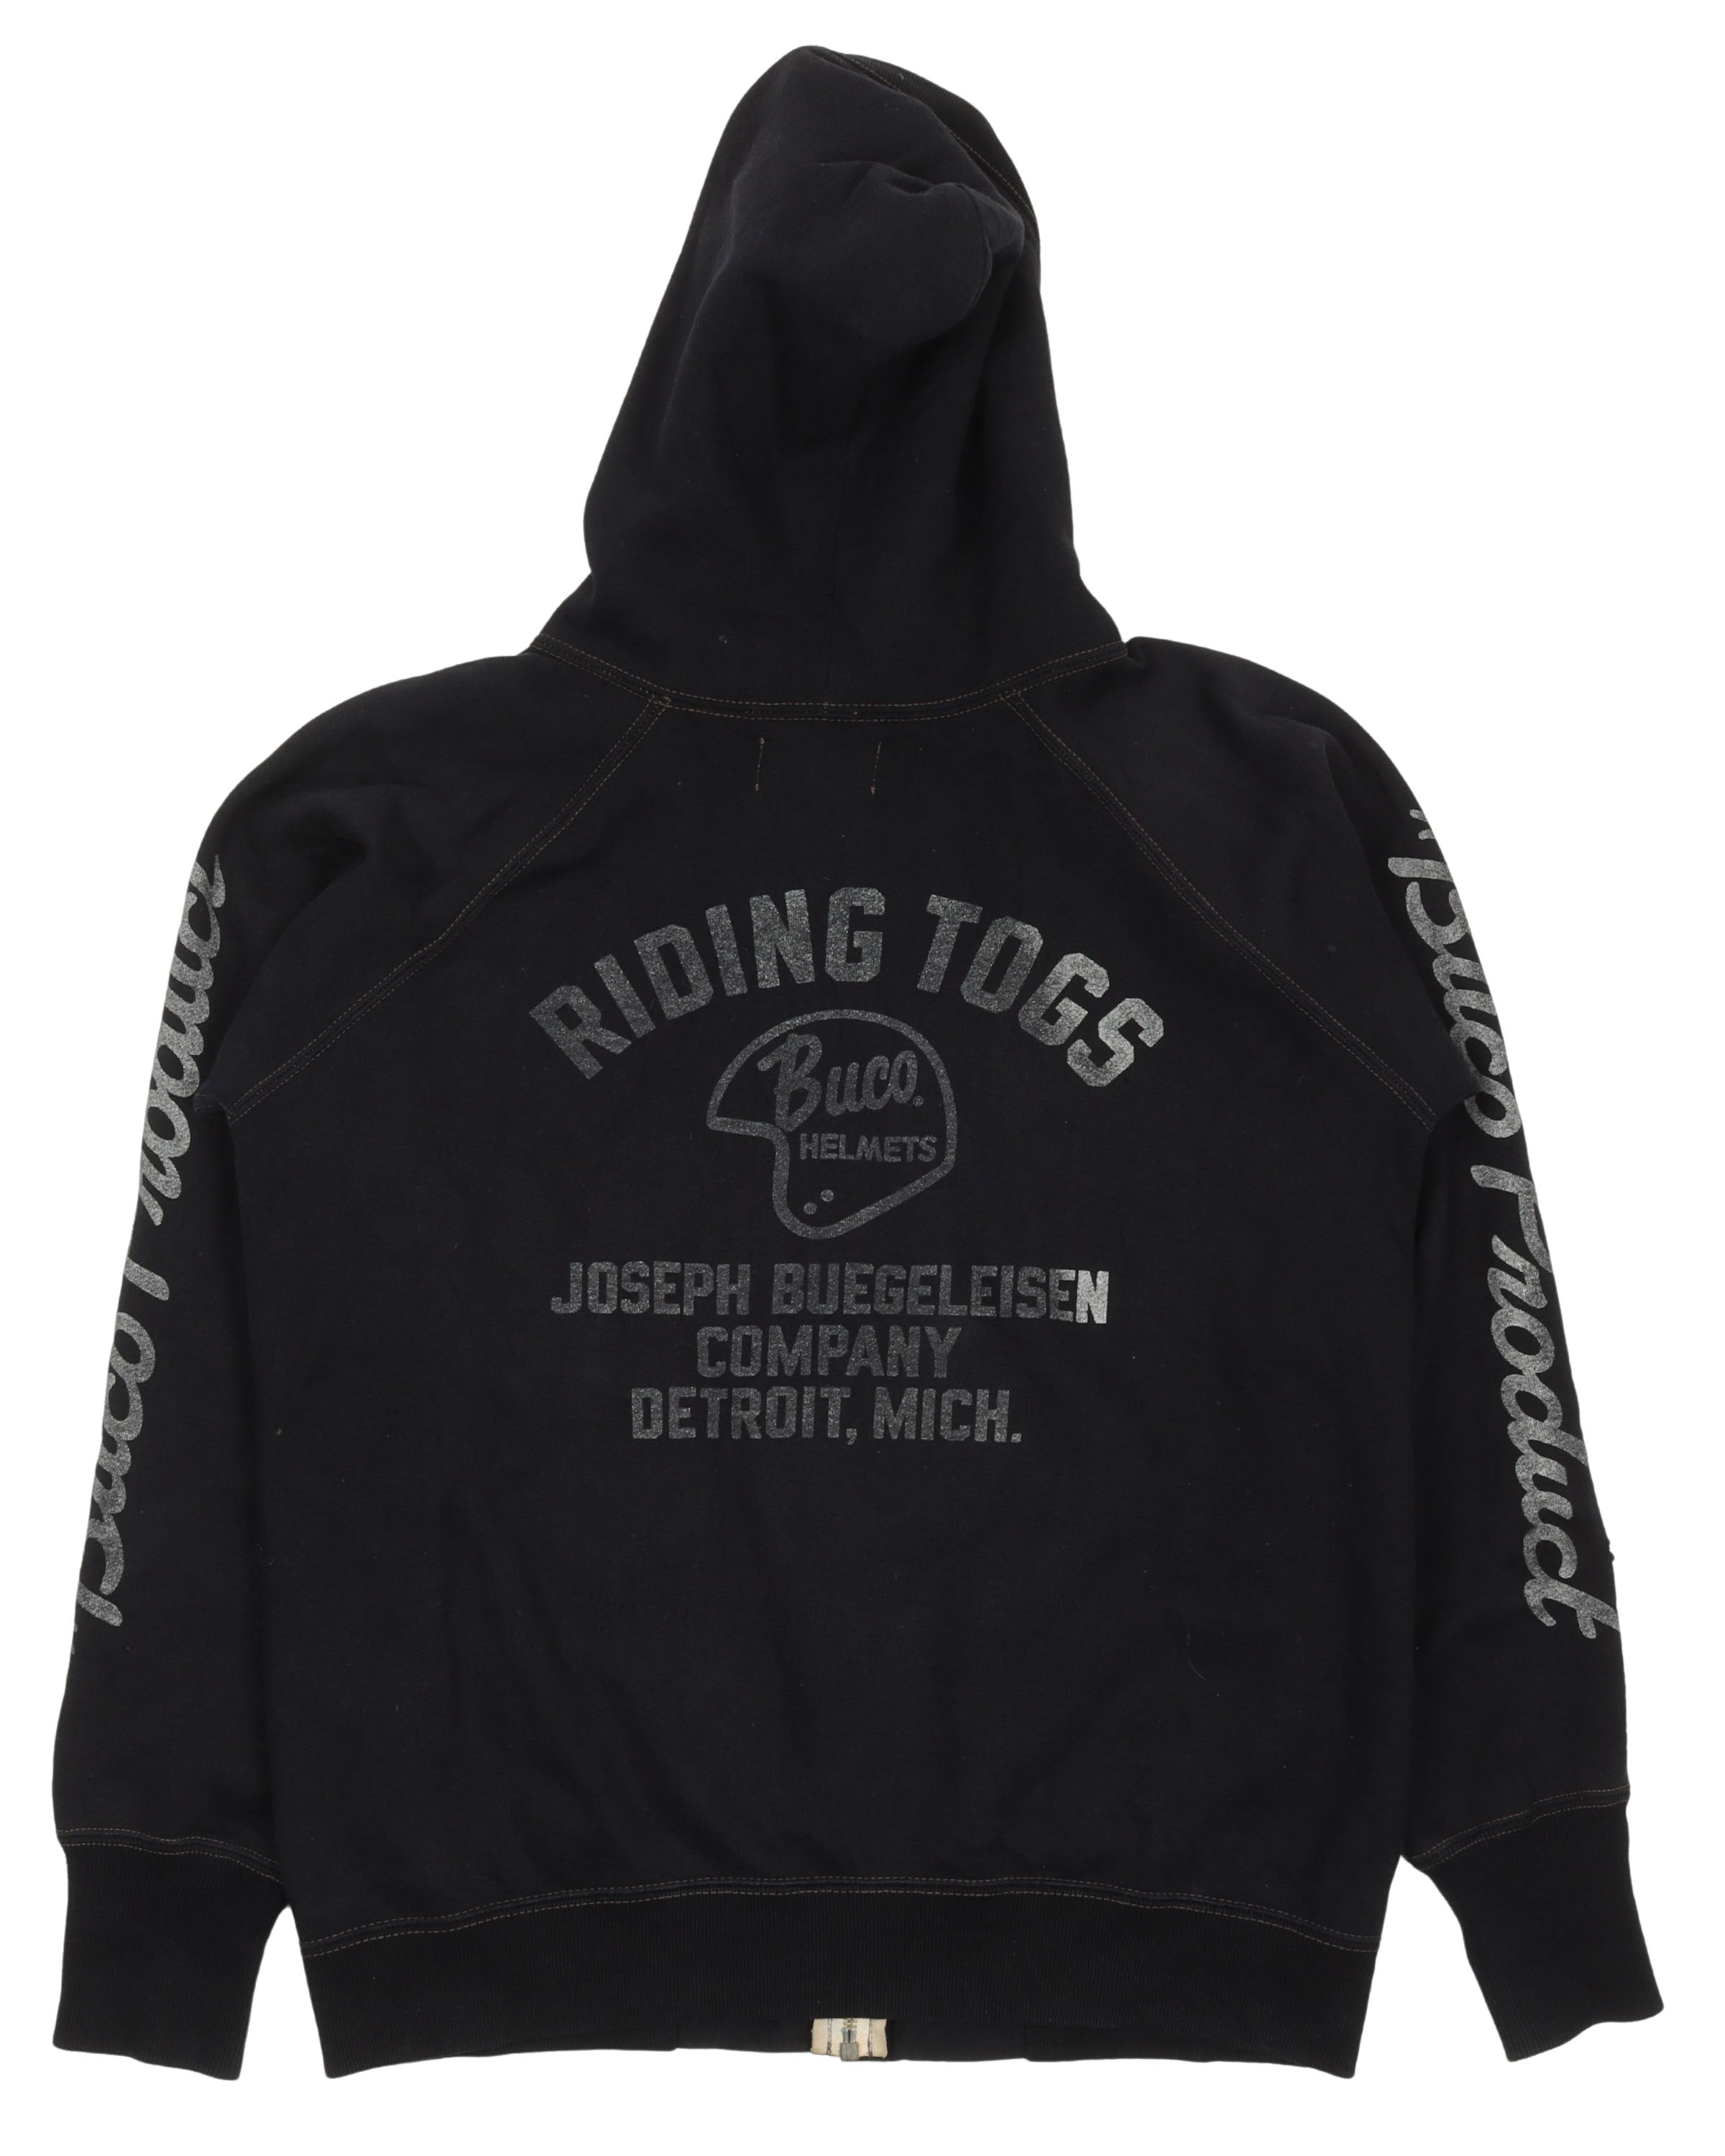 Riding Togs Hoodie